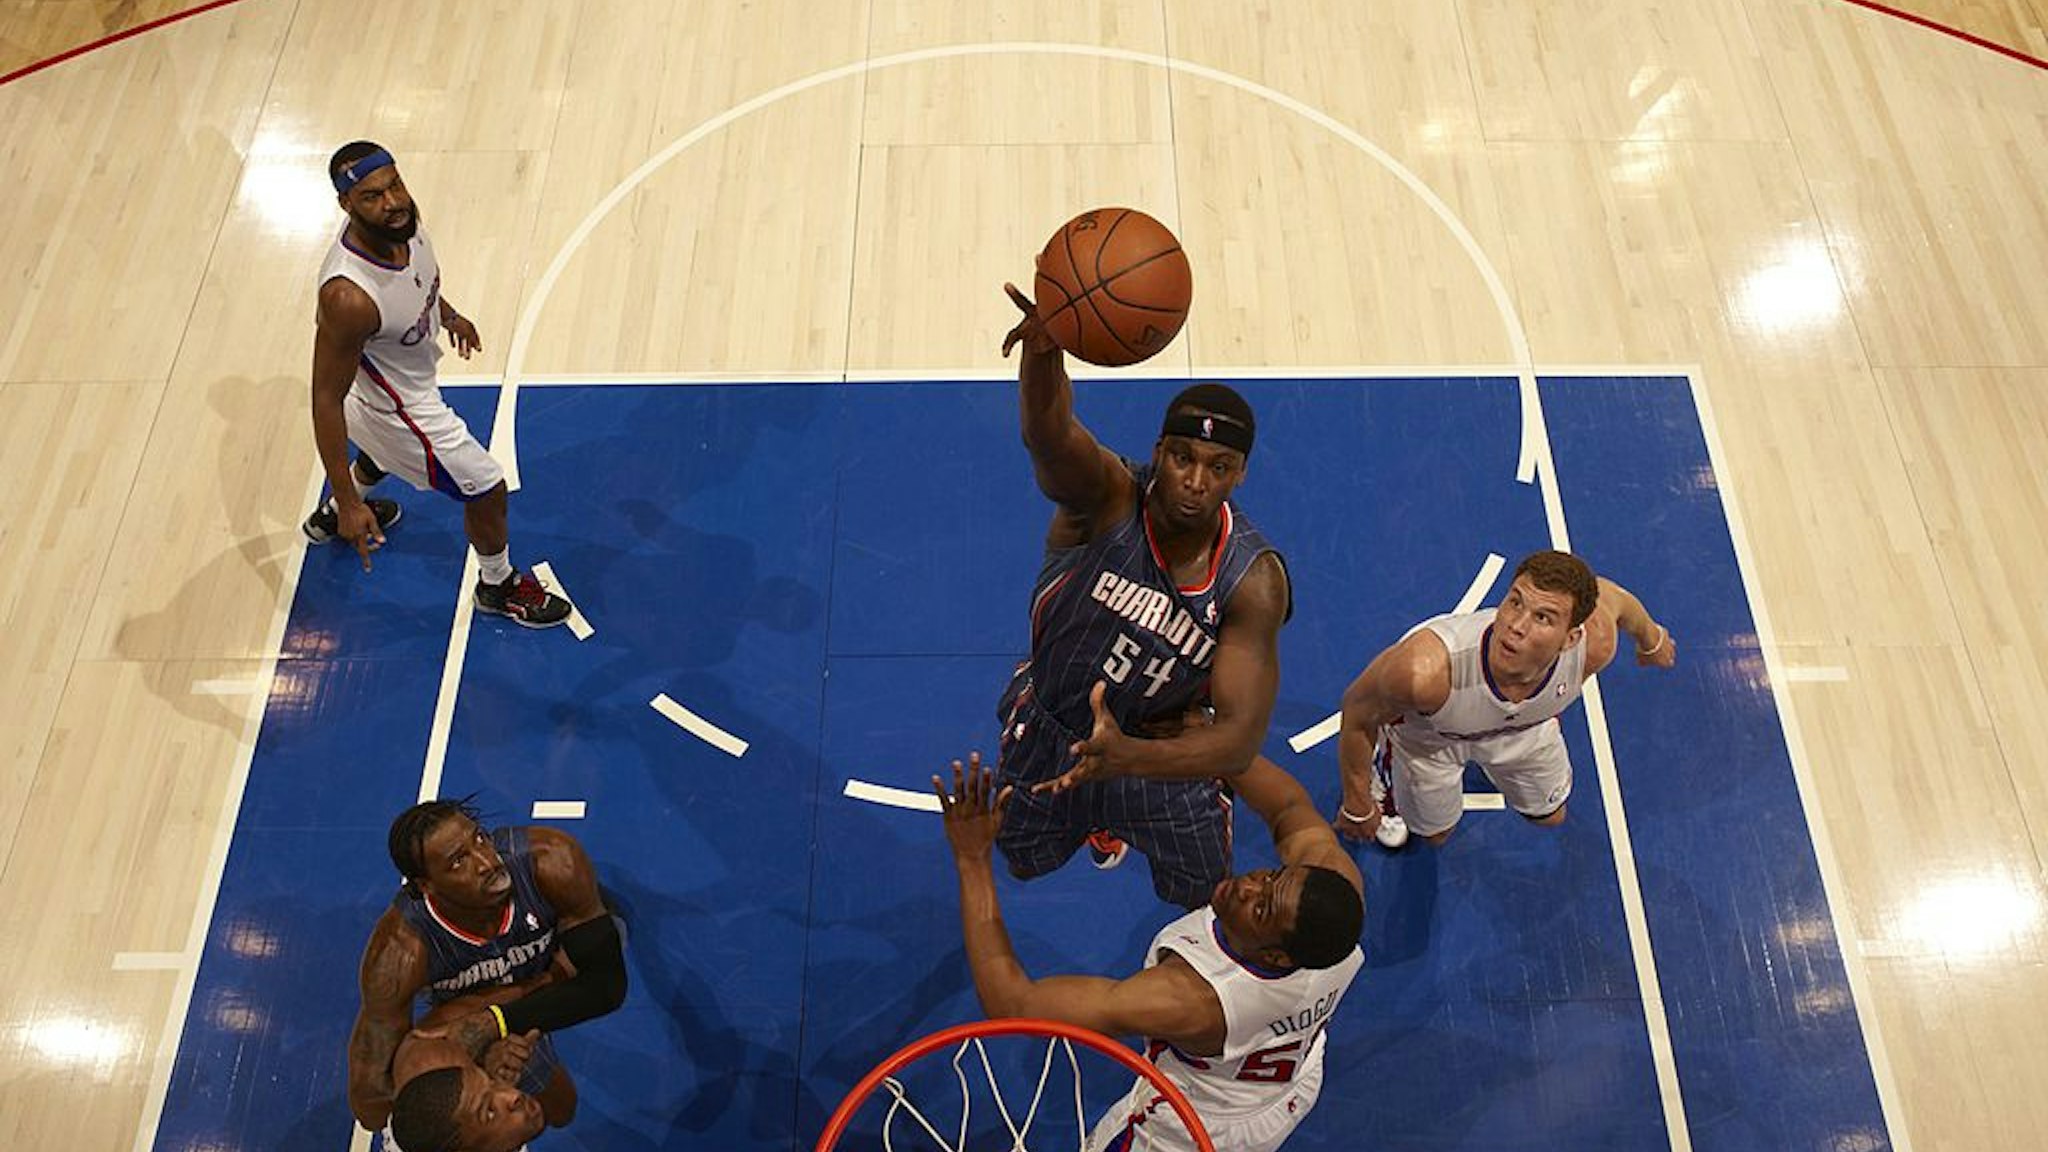 Basketball: Aerial view of Charlotte Bobcats Kwame Brown (54) in action vs Los Angeles Clippers at Staples Center.Los Angeles, CA 1/29/2011CREDIT: John W. McDonough (Photo by John W. McDonough /Sports Illustrated via Getty Images)(Set Number: X85346 TK1 R11 F7 )